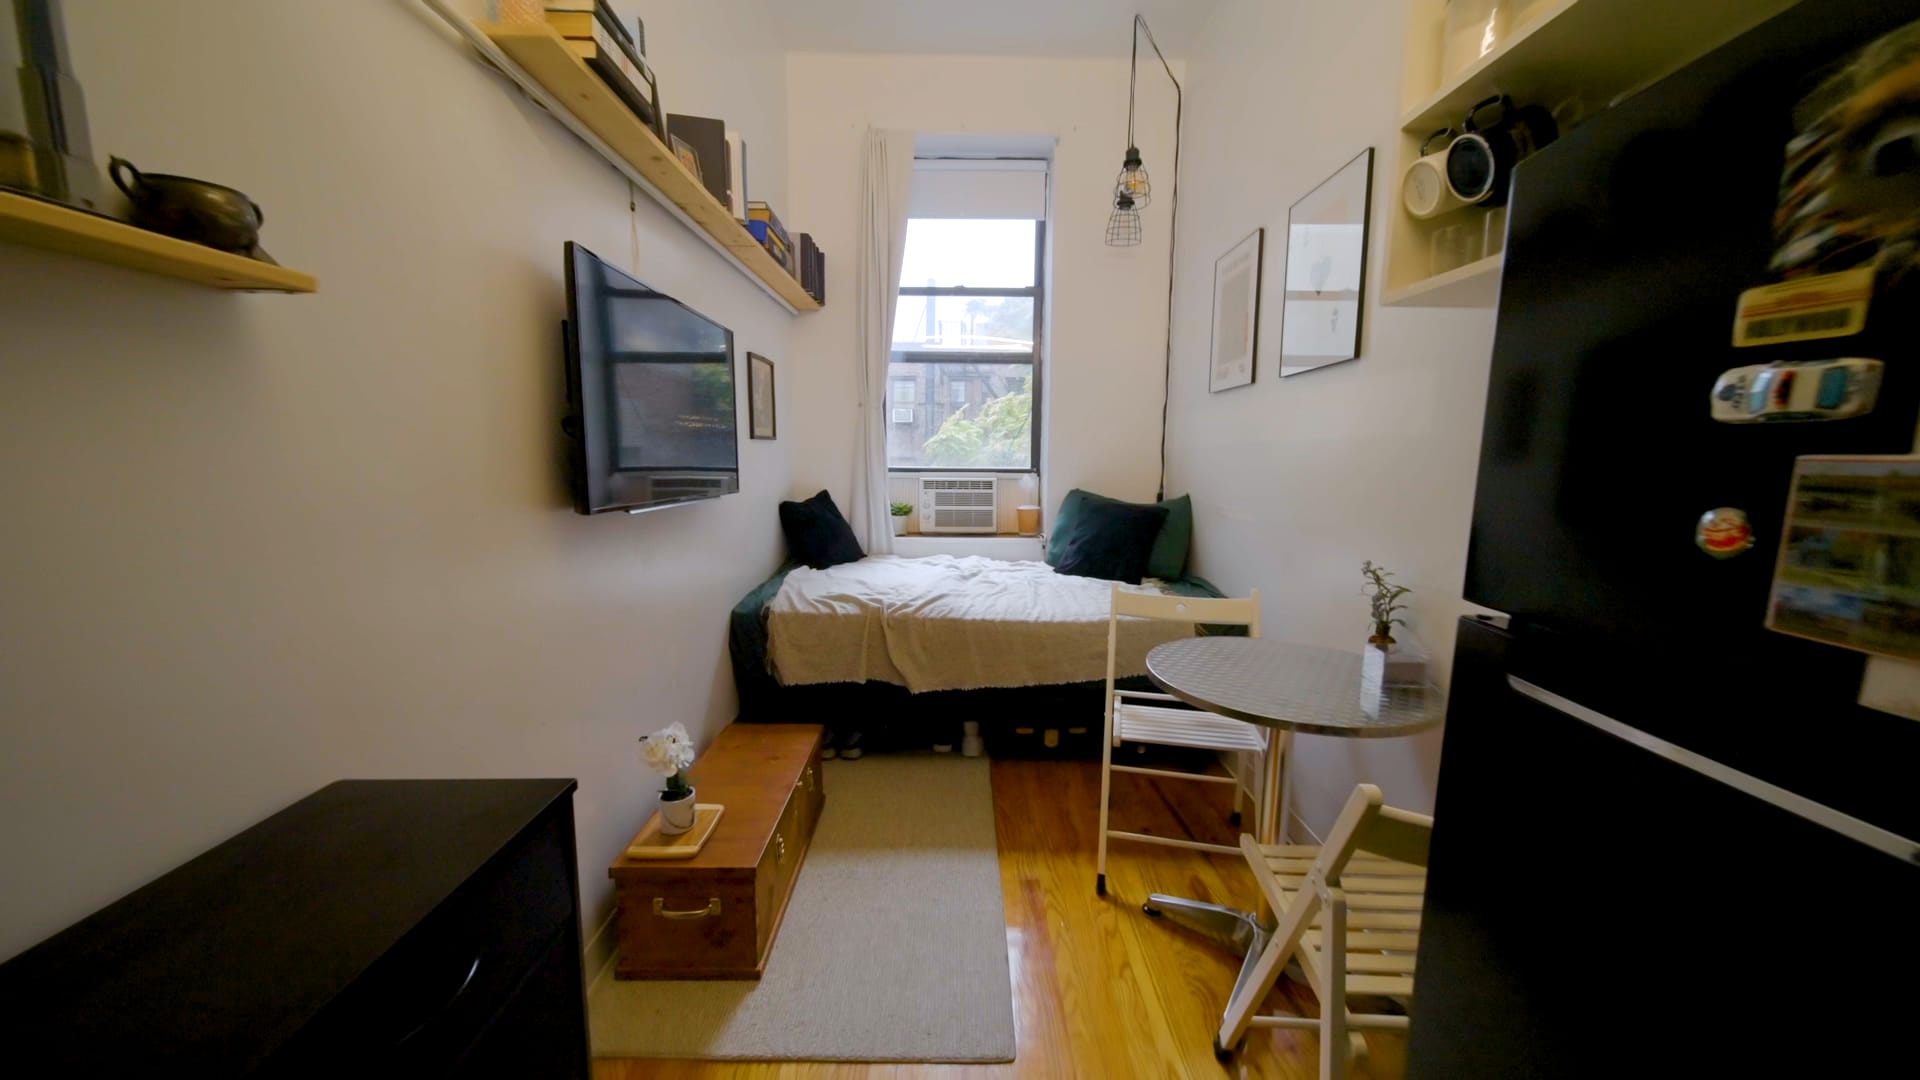 Verhaeg's 95 sq. ft. apartment is about 16 feet x 8 feet or about the size of an average parking spot.